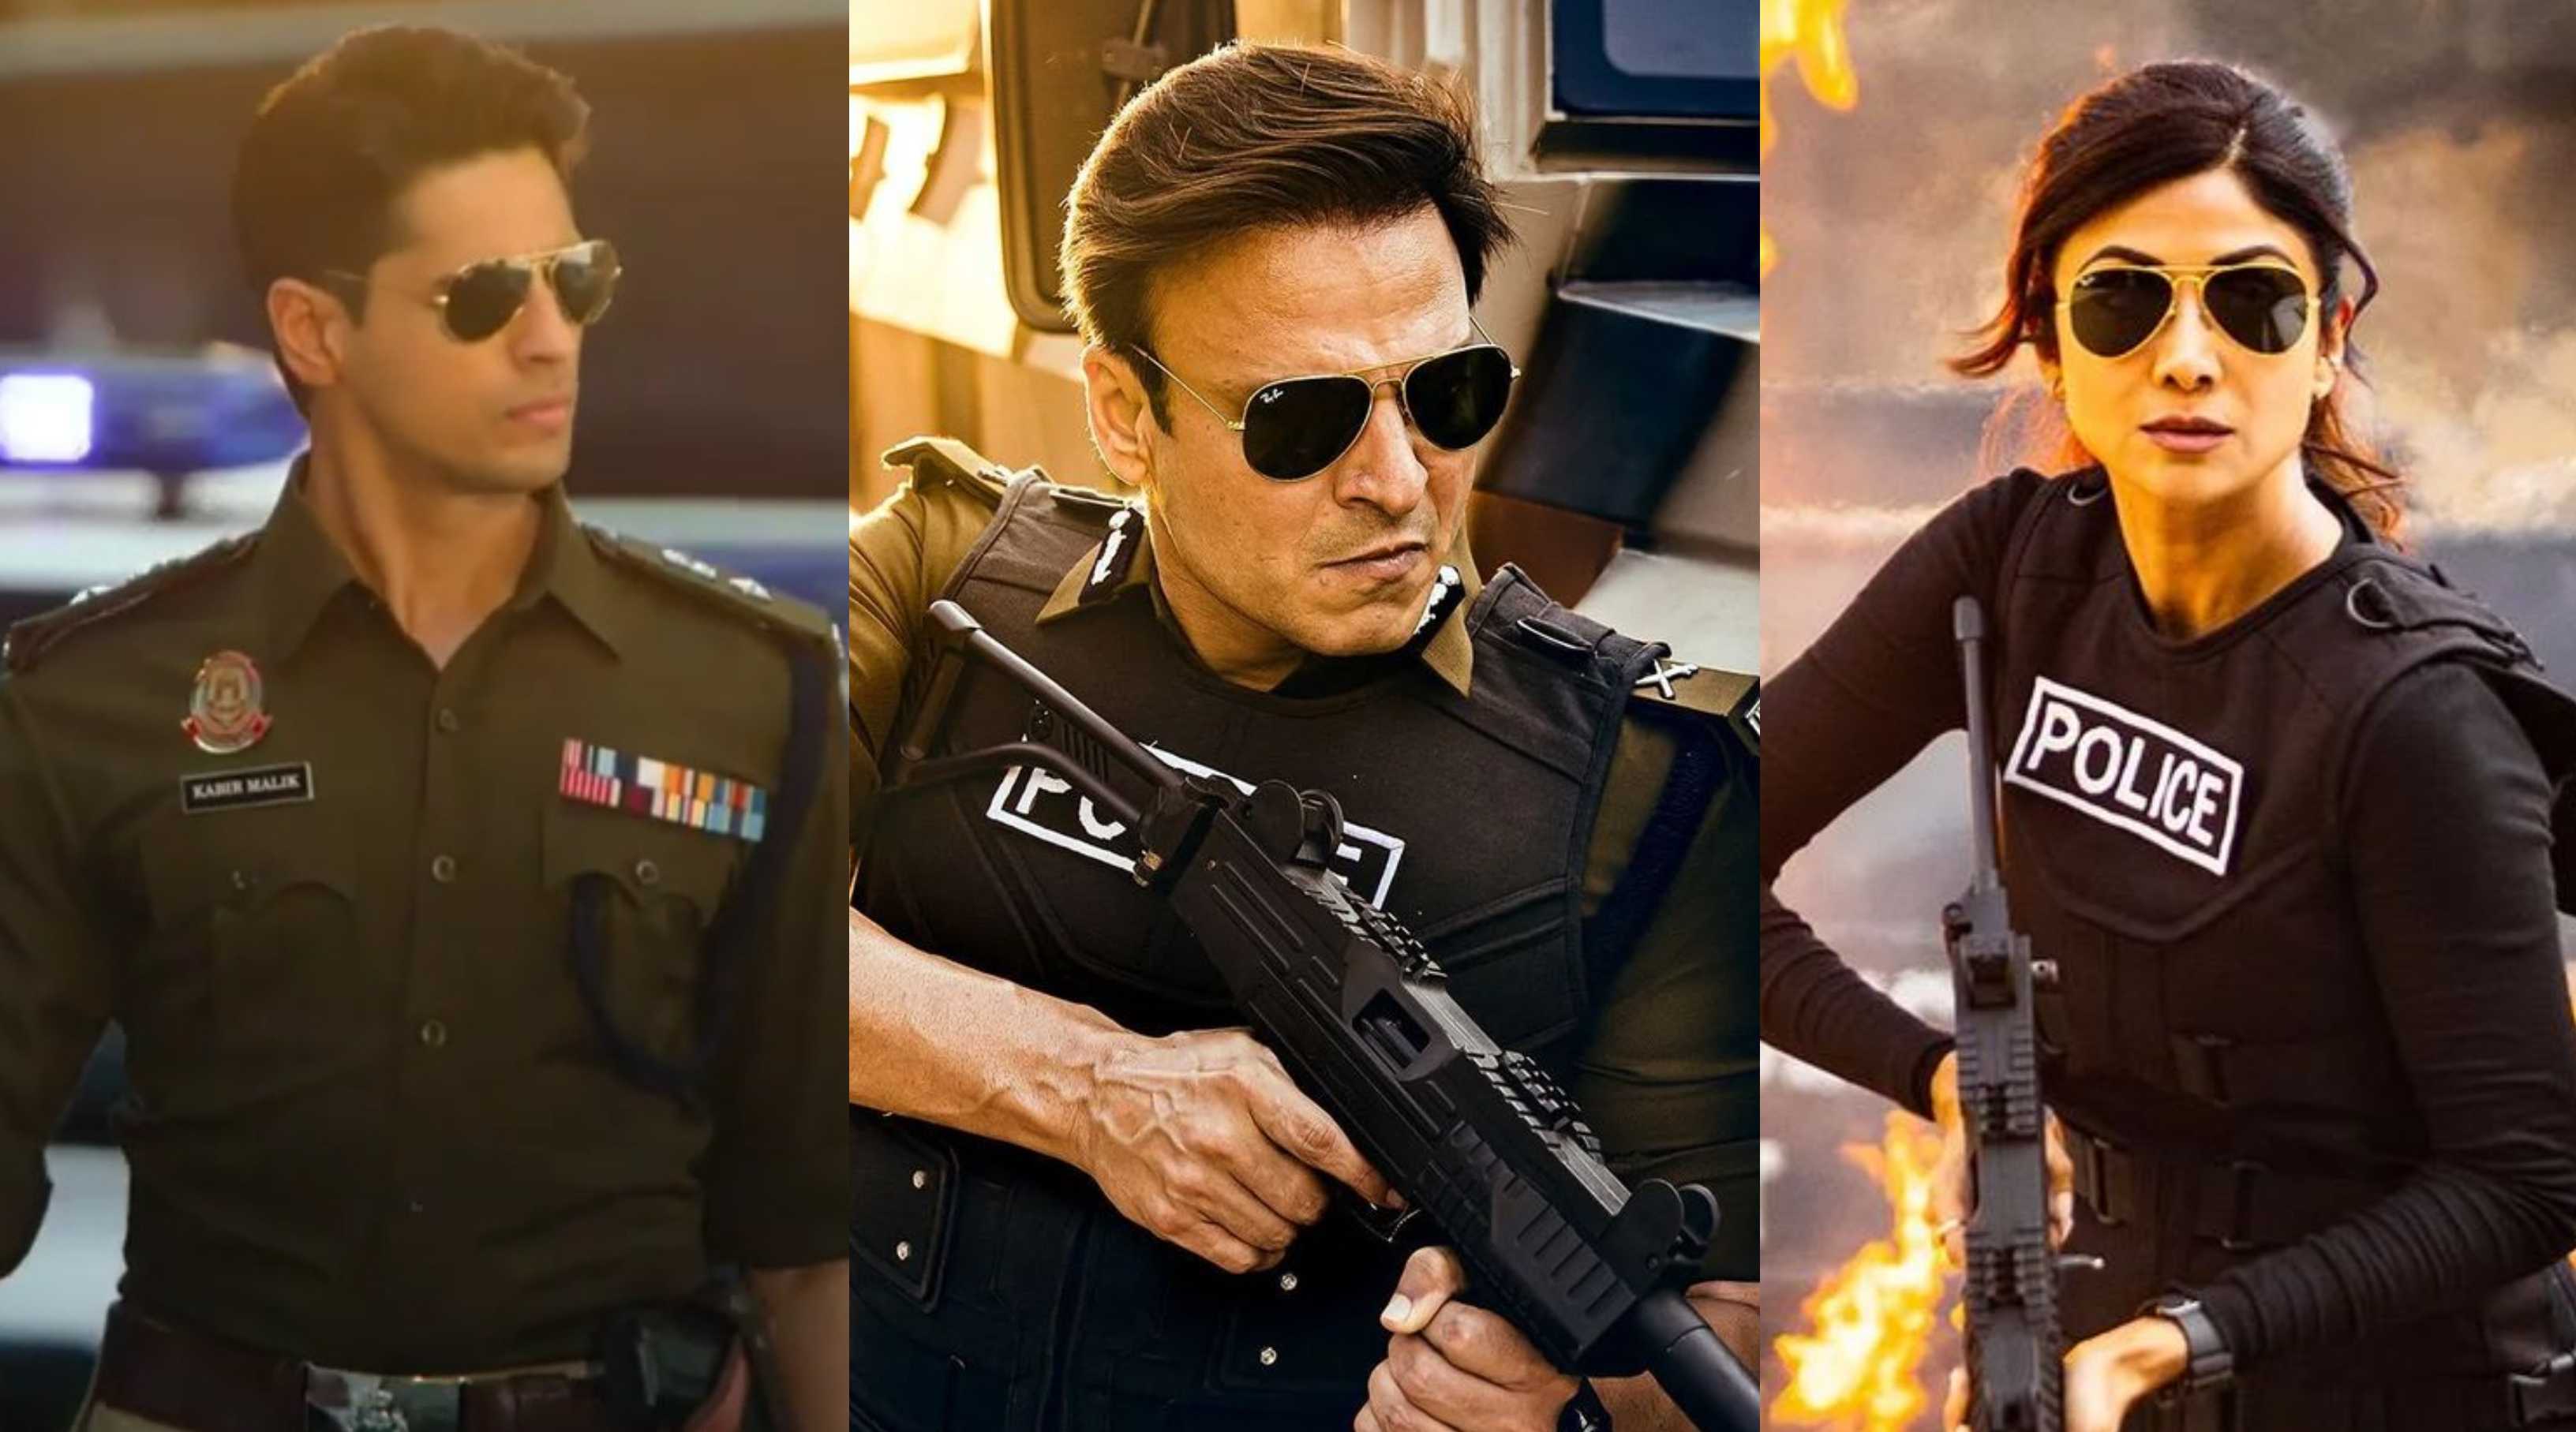 Indian Police Force: Vivek Oberoi joins Sidharth Malhotra and Shilpa Shetty  as super cop in Rohit